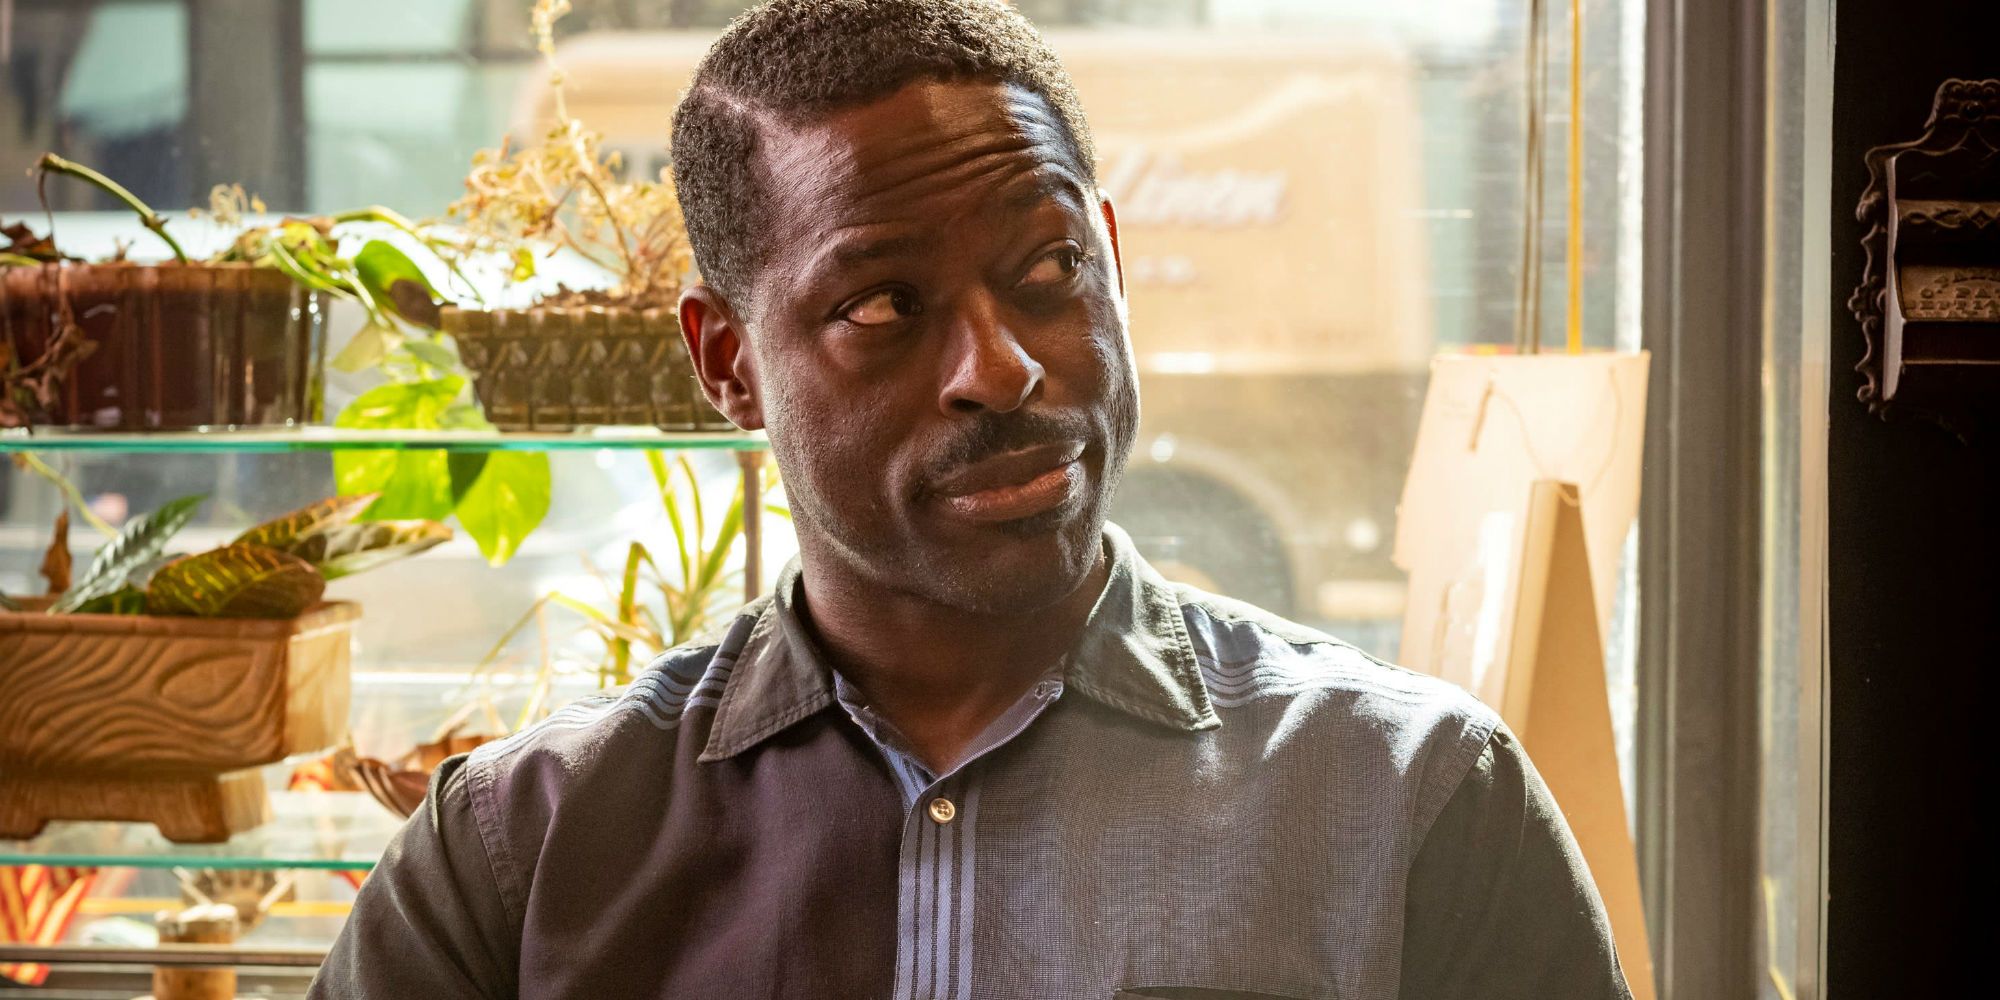 An image of Sterling K Brown in The Marvelous Mrs Maisel. He is seen to be sitting in a cafe and smiling to someone off-screen. He is also wearing a grey shirt